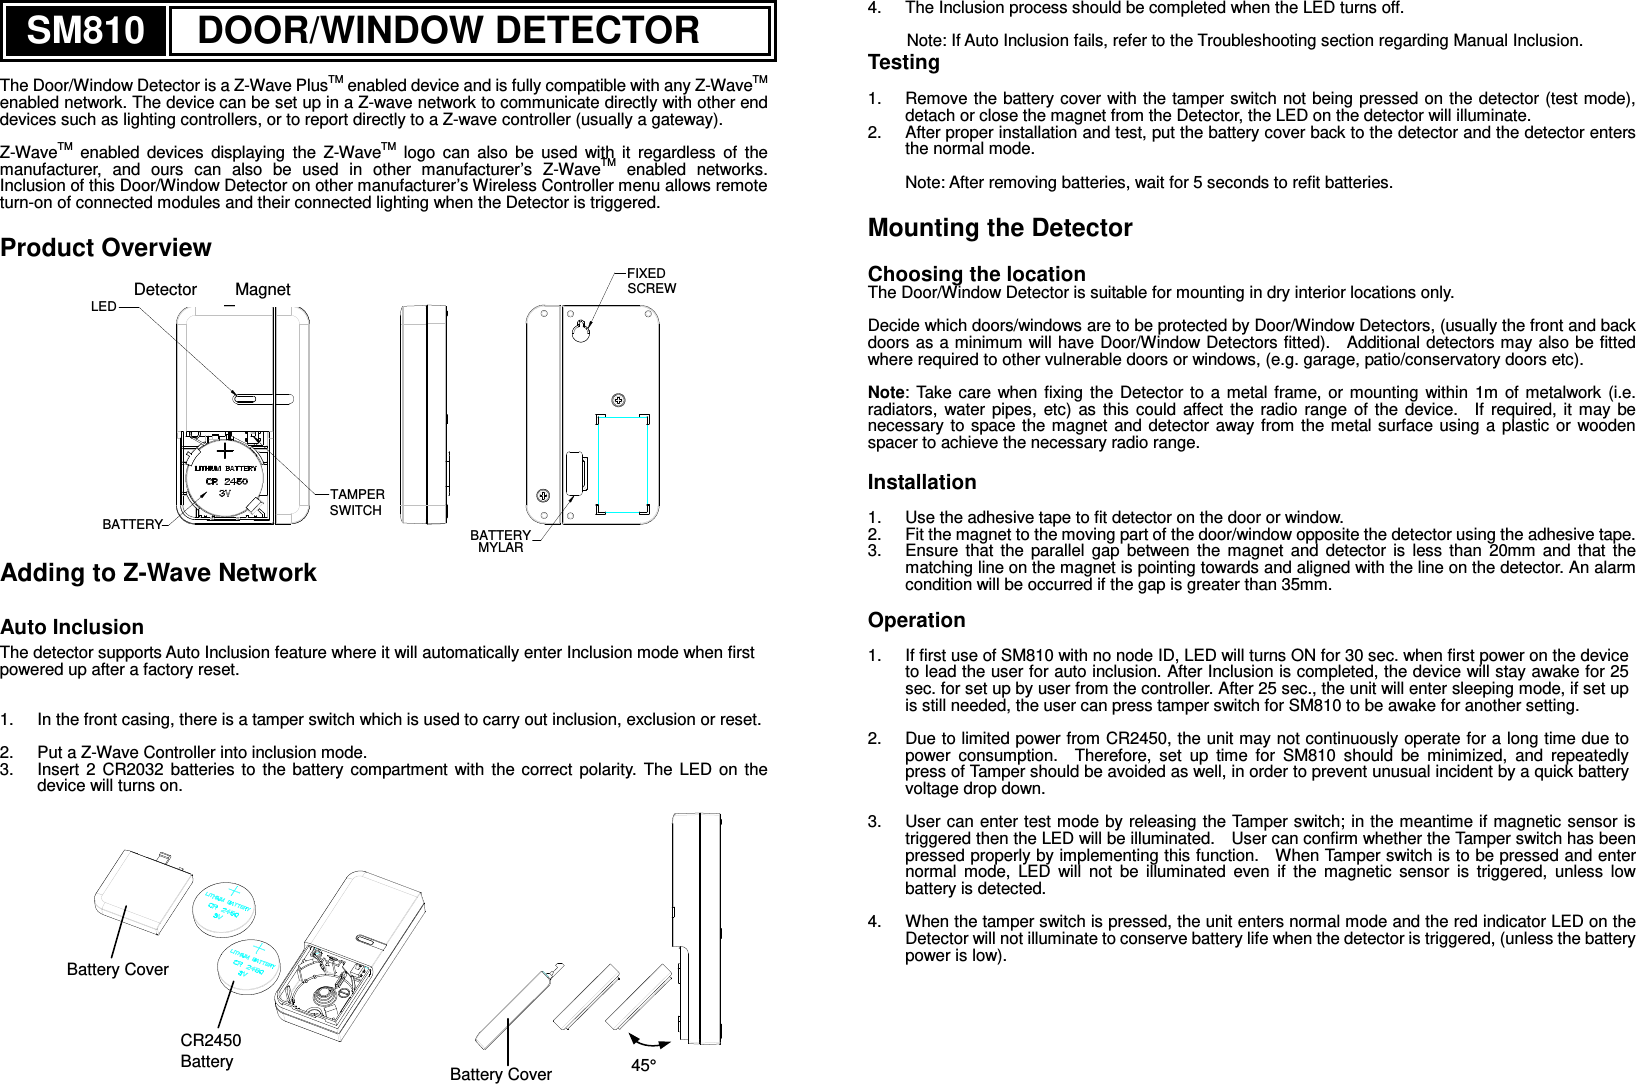 SM810 DOOR/WINDOW DETECTOR  The Door/Window Detector is a Z-Wave PlusTM enabled device and is fully compatible with any Z-WaveTM enabled network. The device can be set up in a Z-wave network to communicate directly with other end devices such as lighting controllers, or to report directly to a Z-wave controller (usually a gateway).  Z-WaveTM  enabled  devices  displaying  the  Z-WaveTM  logo  can  also  be  used  with  it  regardless  of  the manufacturer,  and  ours  can  also  be  used  in  other  manufacturer’s  Z-WaveTM  enabled  networks.   Inclusion of this Door/Window Detector on other manufacturer’s Wireless Controller menu allows remote turn-on of connected modules and their connected lighting when the Detector is triggered.  Product Overview LEDTAMPERSWITCHBATTERY BATTERYMYLARFIXEDSCREW Adding to Z-Wave Network  Auto Inclusion The detector supports Auto Inclusion feature where it will automatically enter Inclusion mode when first powered up after a factory reset.   1.  In the front casing, there is a tamper switch which is used to carry out inclusion, exclusion or reset.      2.  Put a Z-Wave Controller into inclusion mode. 3.  Insert  2  CR2032  batteries  to  the  battery  compartment  with  the  correct  polarity.  The  LED  on  the device will turns on.              4.  The Inclusion process should be completed when the LED turns off.  Note: If Auto Inclusion fails, refer to the Troubleshooting section regarding Manual Inclusion. Testing  1.  Remove the battery cover with the tamper switch not being pressed on the detector (test mode), detach or close the magnet from the Detector, the LED on the detector will illuminate. 2.  After proper installation and test, put the battery cover back to the detector and the detector enters the normal mode.  Note: After removing batteries, wait for 5 seconds to refit batteries.  Mounting the Detector  Choosing the location The Door/Window Detector is suitable for mounting in dry interior locations only.  Decide which doors/windows are to be protected by Door/Window Detectors, (usually the front and back doors as a minimum will have Door/Window Detectors fitted).    Additional detectors may also be fitted where required to other vulnerable doors or windows, (e.g. garage, patio/conservatory doors etc).  Note: Take  care when  fixing  the  Detector  to  a metal  frame, or  mounting  within  1m  of  metalwork  (i.e. radiators,  water  pipes,  etc)  as  this  could  affect  the  radio  range  of  the  device.    If  required,  it  may  be necessary to  space  the magnet  and  detector away from  the metal surface  using  a plastic  or wooden spacer to achieve the necessary radio range.  Installation  1.  Use the adhesive tape to fit detector on the door or window. 2.  Fit the magnet to the moving part of the door/window opposite the detector using the adhesive tape. 3.  Ensure  that  the  parallel  gap  between  the  magnet  and  detector  is  less  than  20mm  and  that  the matching line on the magnet is pointing towards and aligned with the line on the detector. An alarm condition will be occurred if the gap is greater than 35mm.    Operation  1.  If first use of SM810 with no node ID, LED will turns ON for 30 sec. when first power on the device to lead the user for auto inclusion. After Inclusion is completed, the device will stay awake for 25 sec. for set up by user from the controller. After 25 sec., the unit will enter sleeping mode, if set up is still needed, the user can press tamper switch for SM810 to be awake for another setting.    2.  Due to limited power from CR2450, the unit may not continuously operate for a long time due to power  consumption.    Therefore,  set  up  time  for  SM810  should  be  minimized,  and  repeatedly press of Tamper should be avoided as well, in order to prevent unusual incident by a quick battery voltage drop down.    3.  User can enter test mode by releasing the Tamper switch; in the meantime if magnetic  sensor is triggered then the LED will be illuminated.    User can confirm whether the Tamper switch has been pressed properly by implementing this function.    When Tamper switch is to be pressed and enter normal  mode,  LED  will  not  be  illuminated  even  if  the  magnetic  sensor  is  triggered,  unless  low battery is detected.  4.  When the tamper switch is pressed, the unit enters normal mode and the red indicator LED on the Detector will not illuminate to conserve battery life when the detector is triggered, (unless the battery power is low).      Battery Cover  45° Battery Cover CR2450  Battery Detector  Magnet 